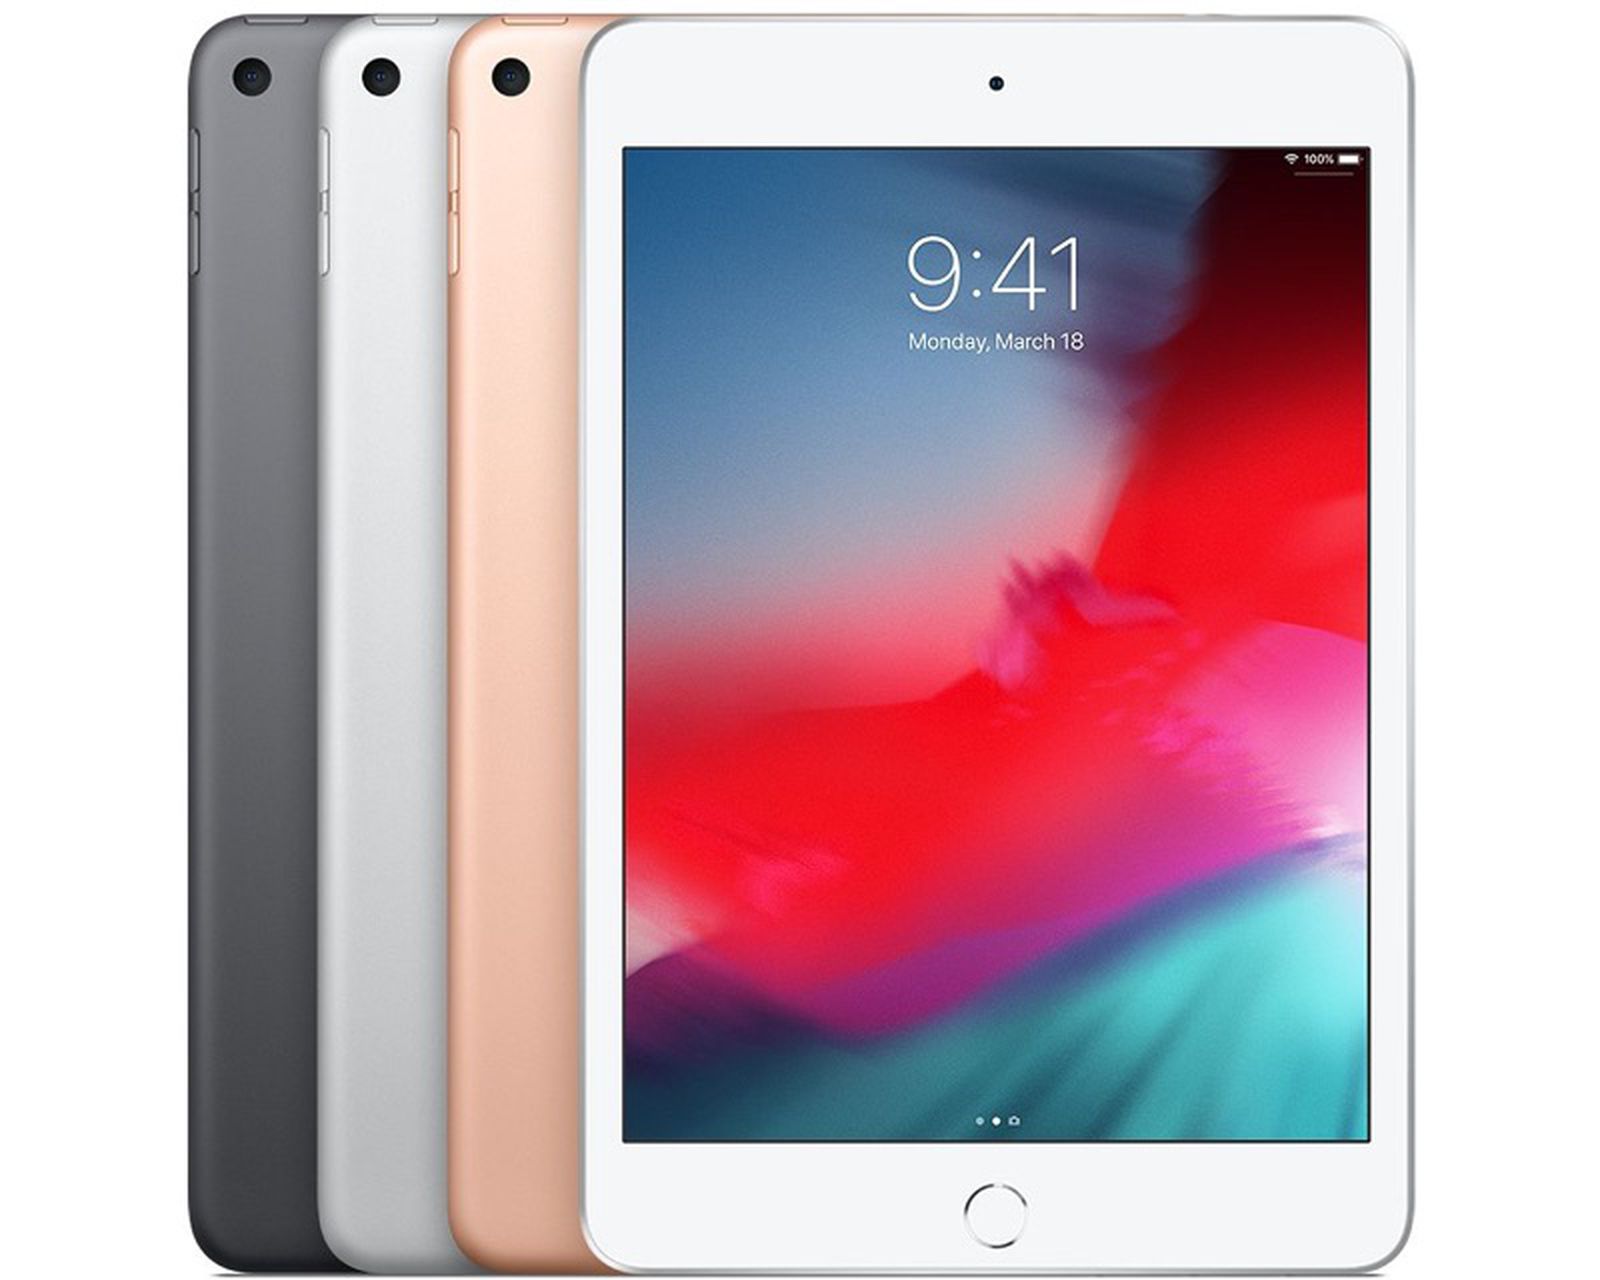 The sixth-generation iPad Mini will have an 8.4-inch screen with thinner frames, expected in March